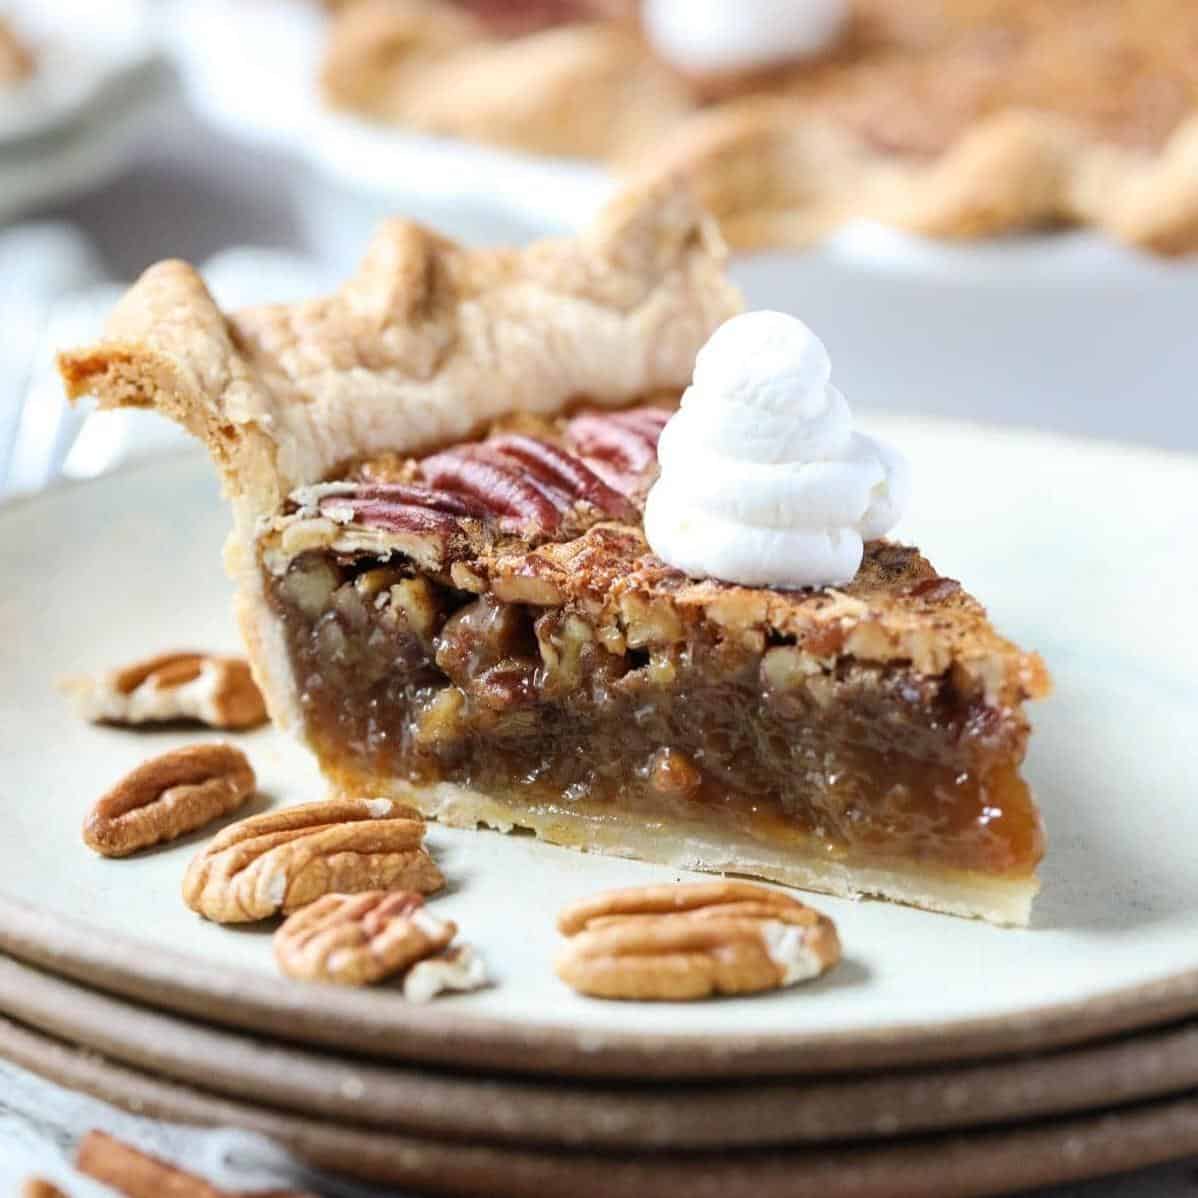  The combination of sweet and nutty flavors make this pie a classic favorite any time of the year.